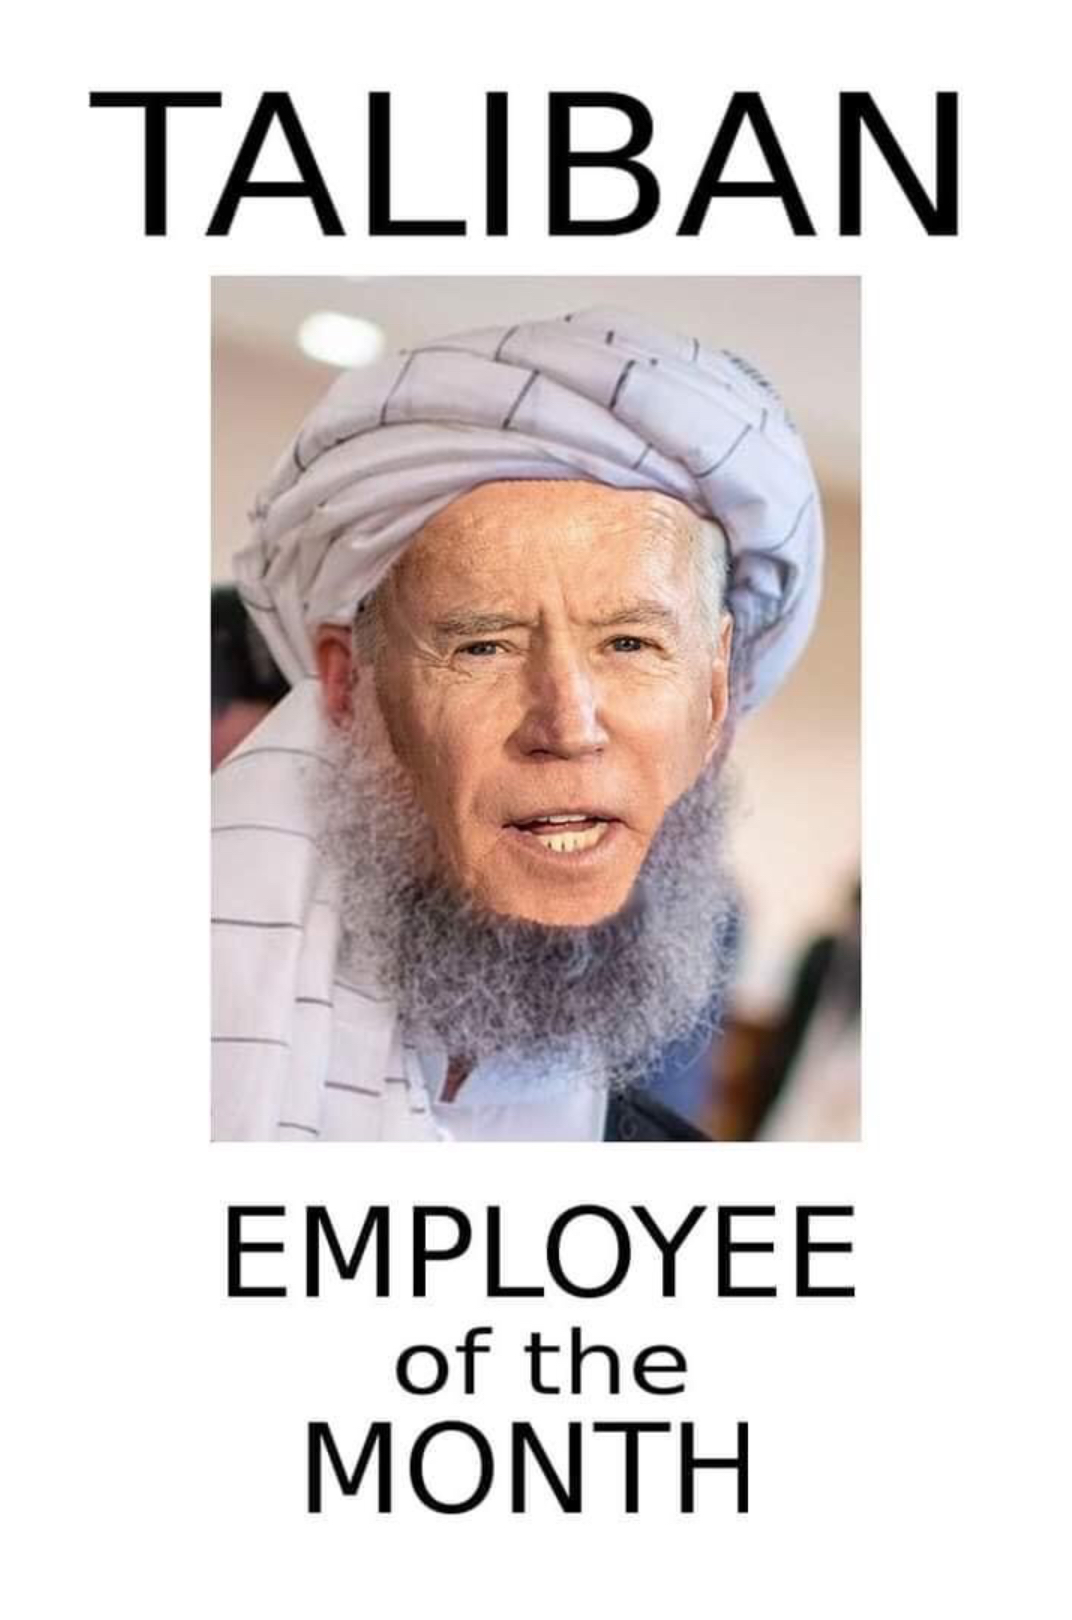 Taliban Employee of the month Blank Meme Template